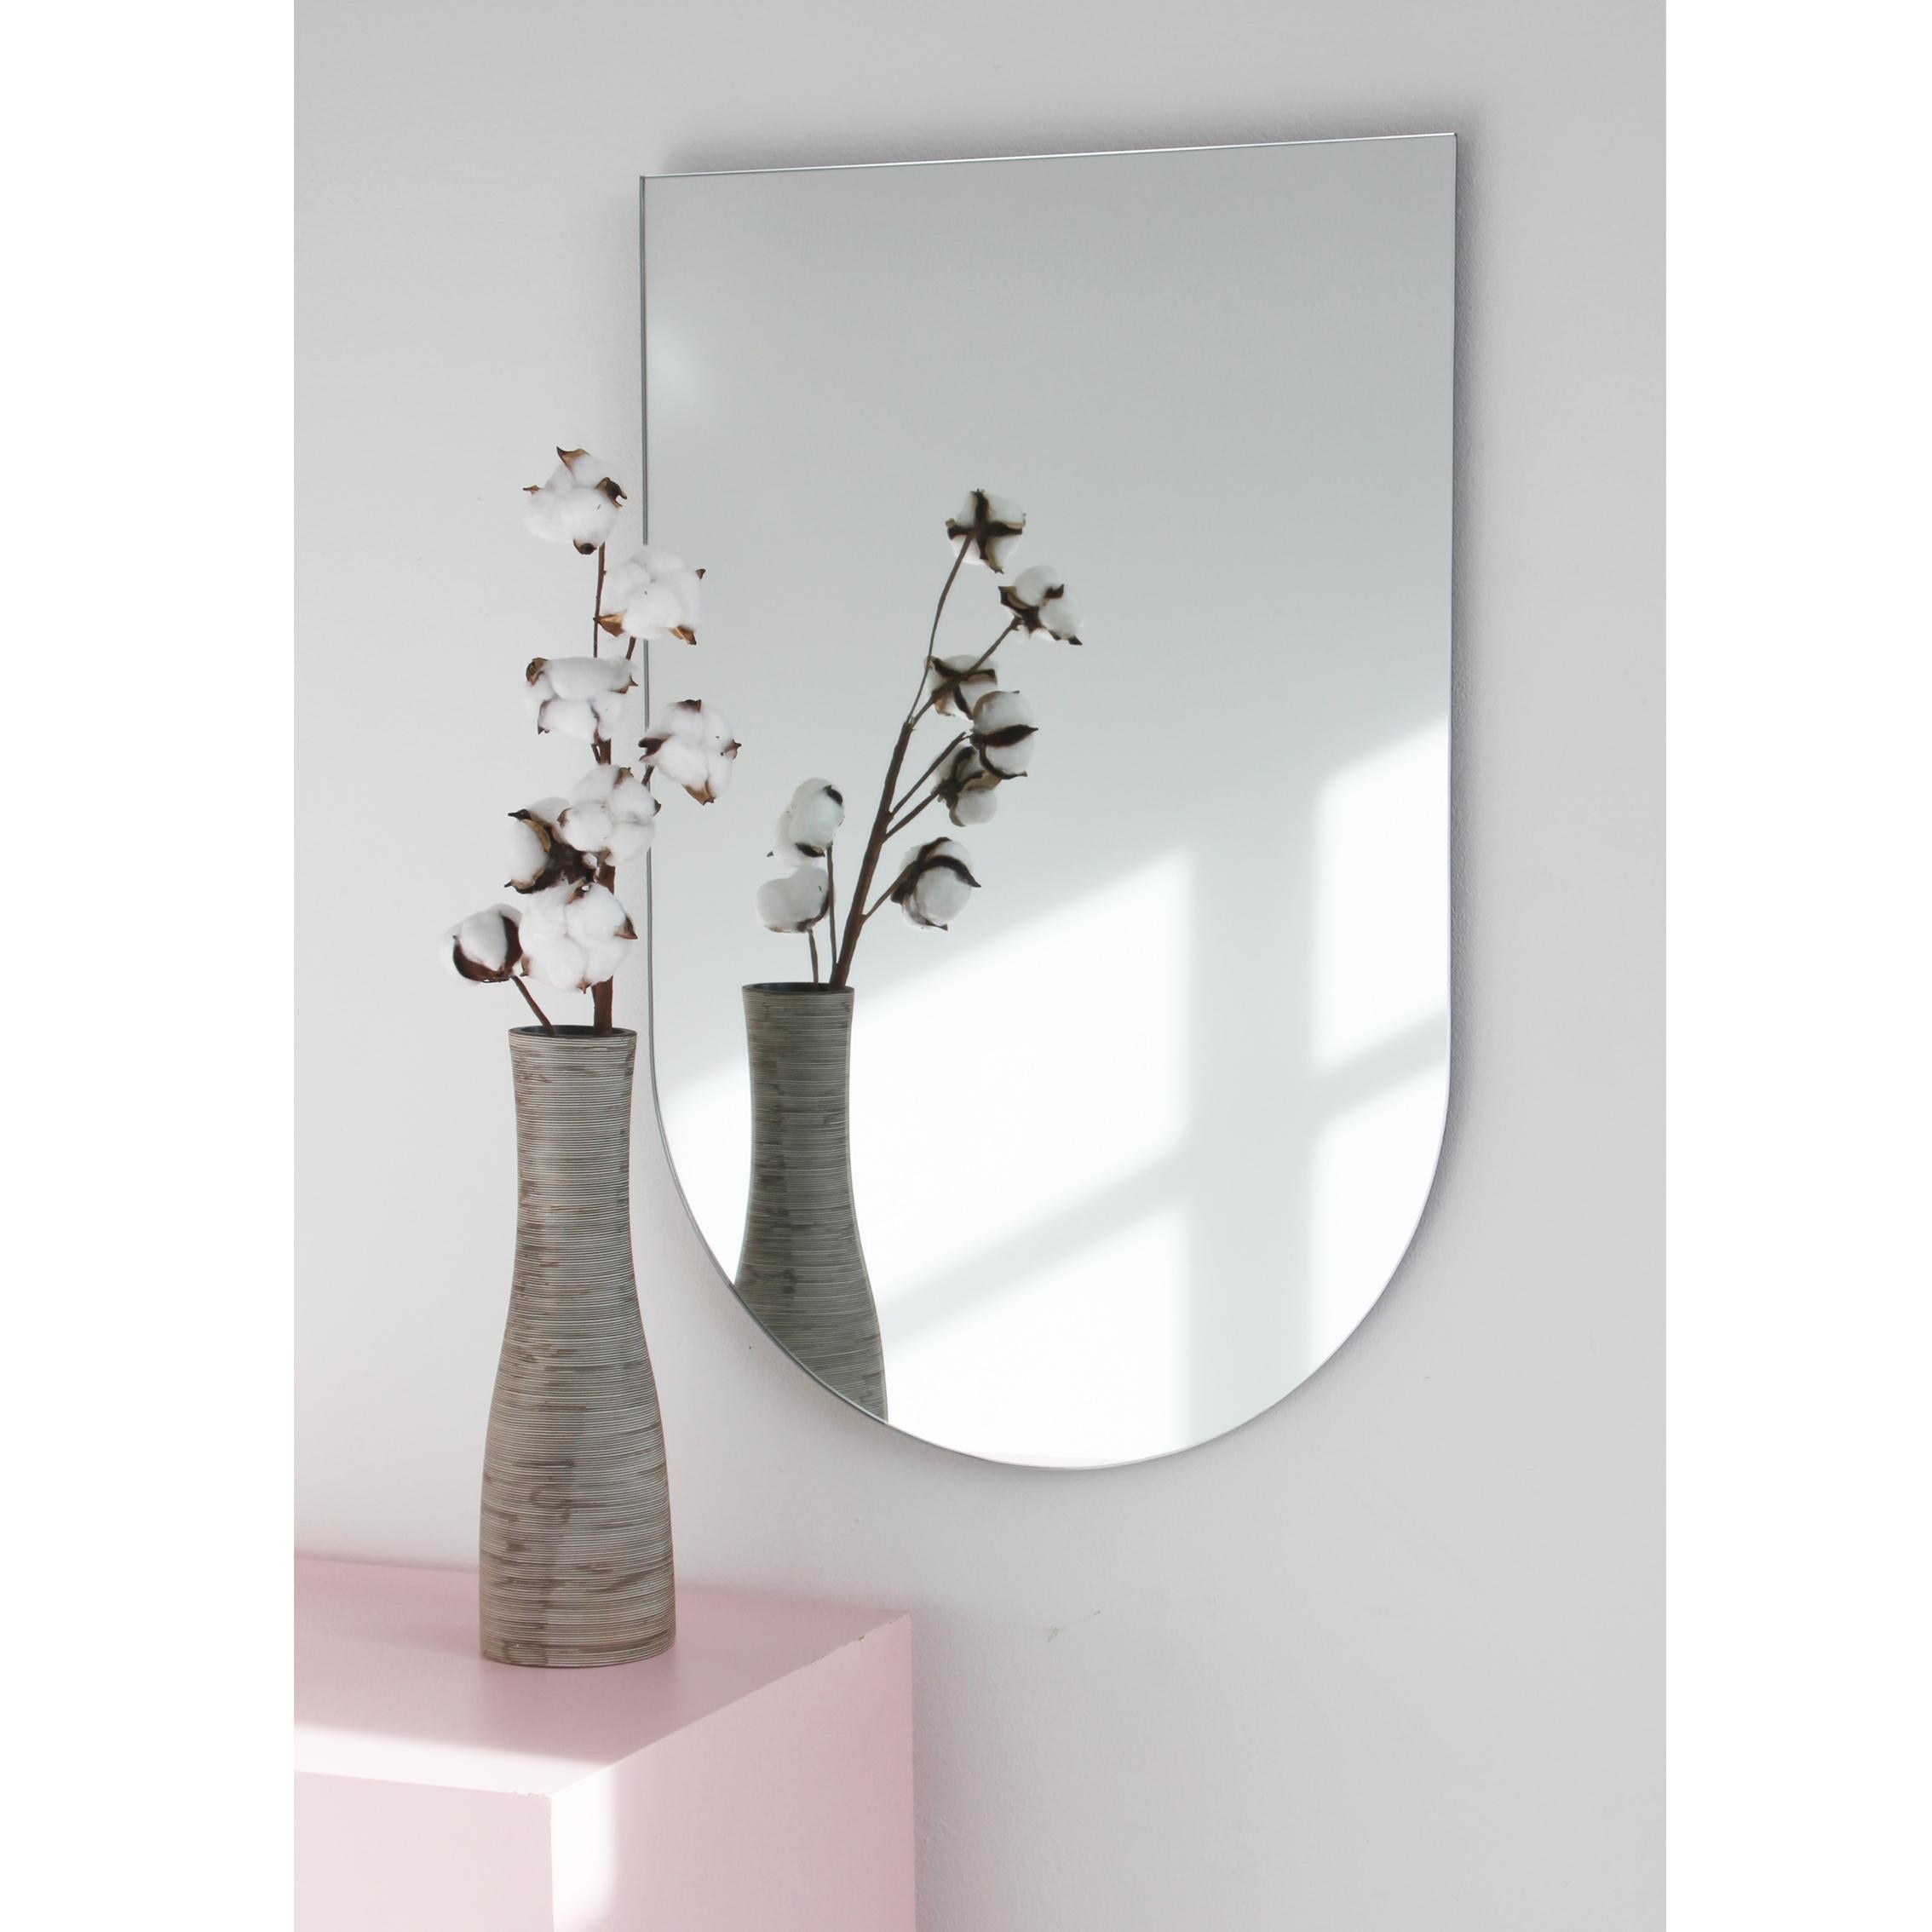 Arcus Arched Modern Contemporary Versatile Frameless Mirror, Large In New Condition For Sale In London, GB